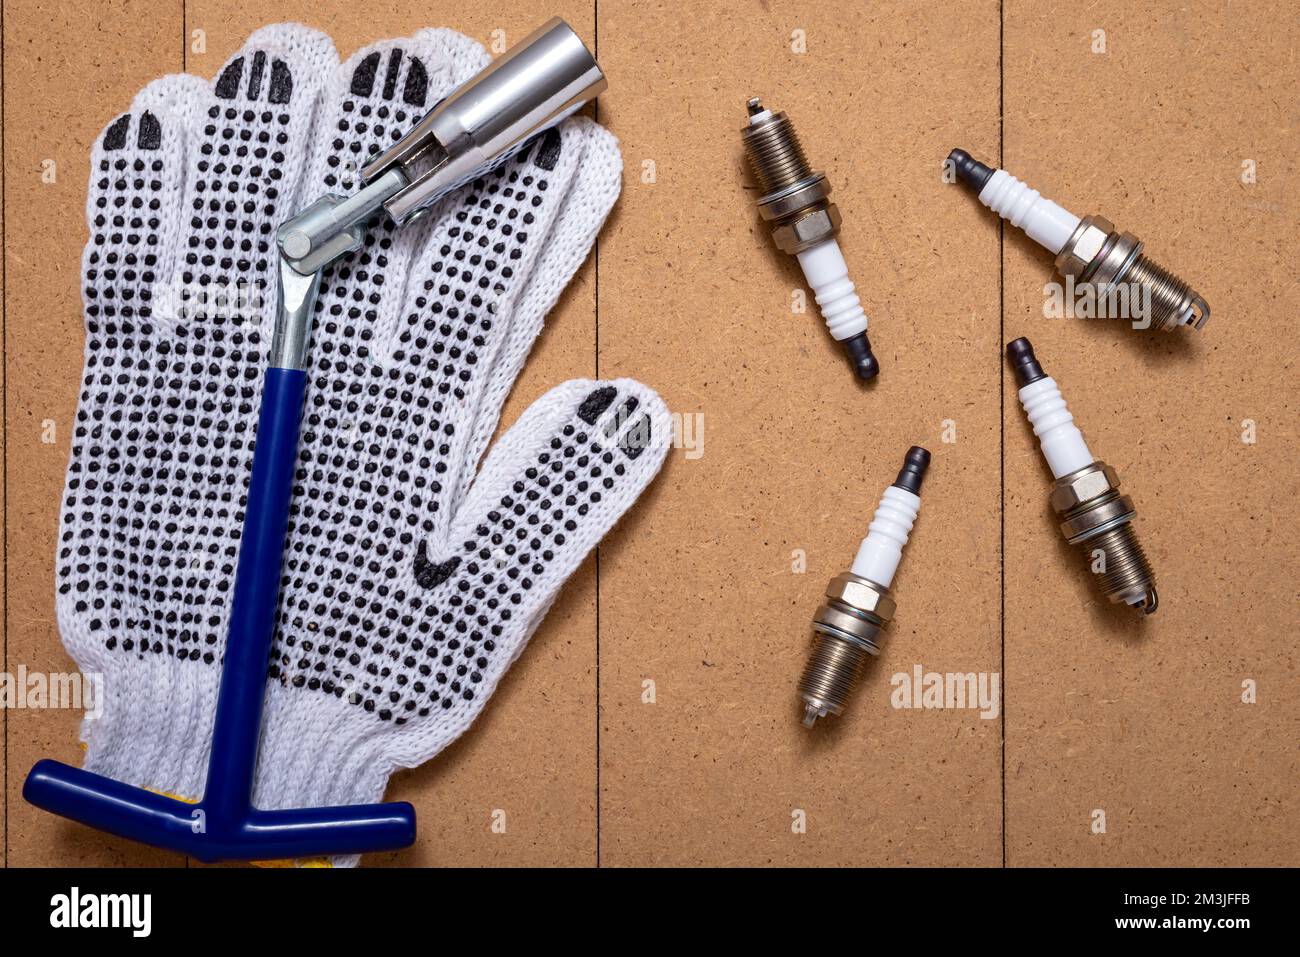 Sparking plugs, spark plug key and protective gloves on wooden table. Stock Photo